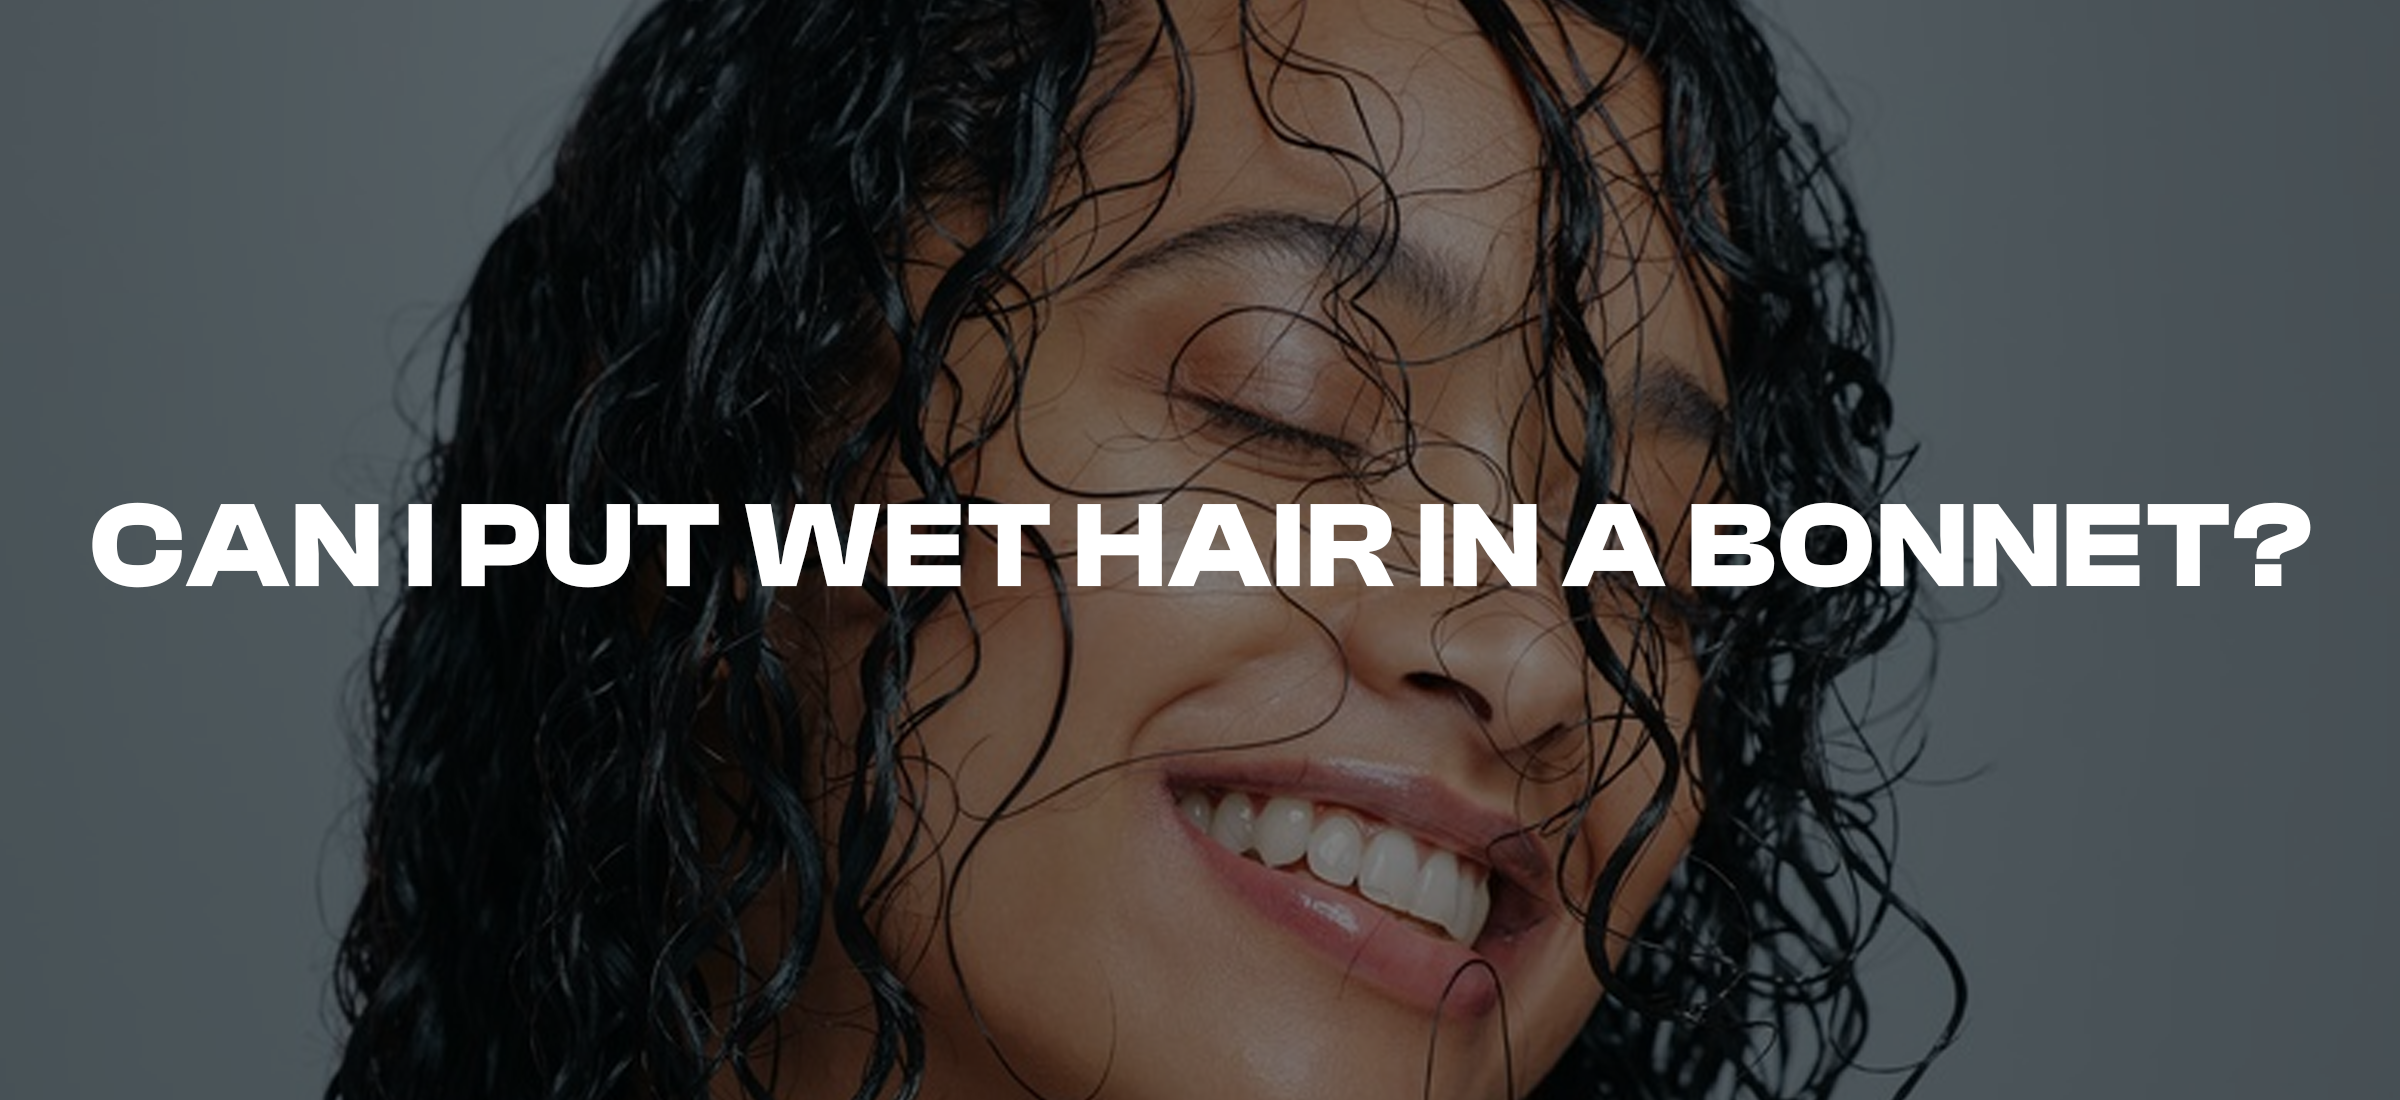 Is It Safe to Put Wet Hair in a Bonnet? Explained by Experts